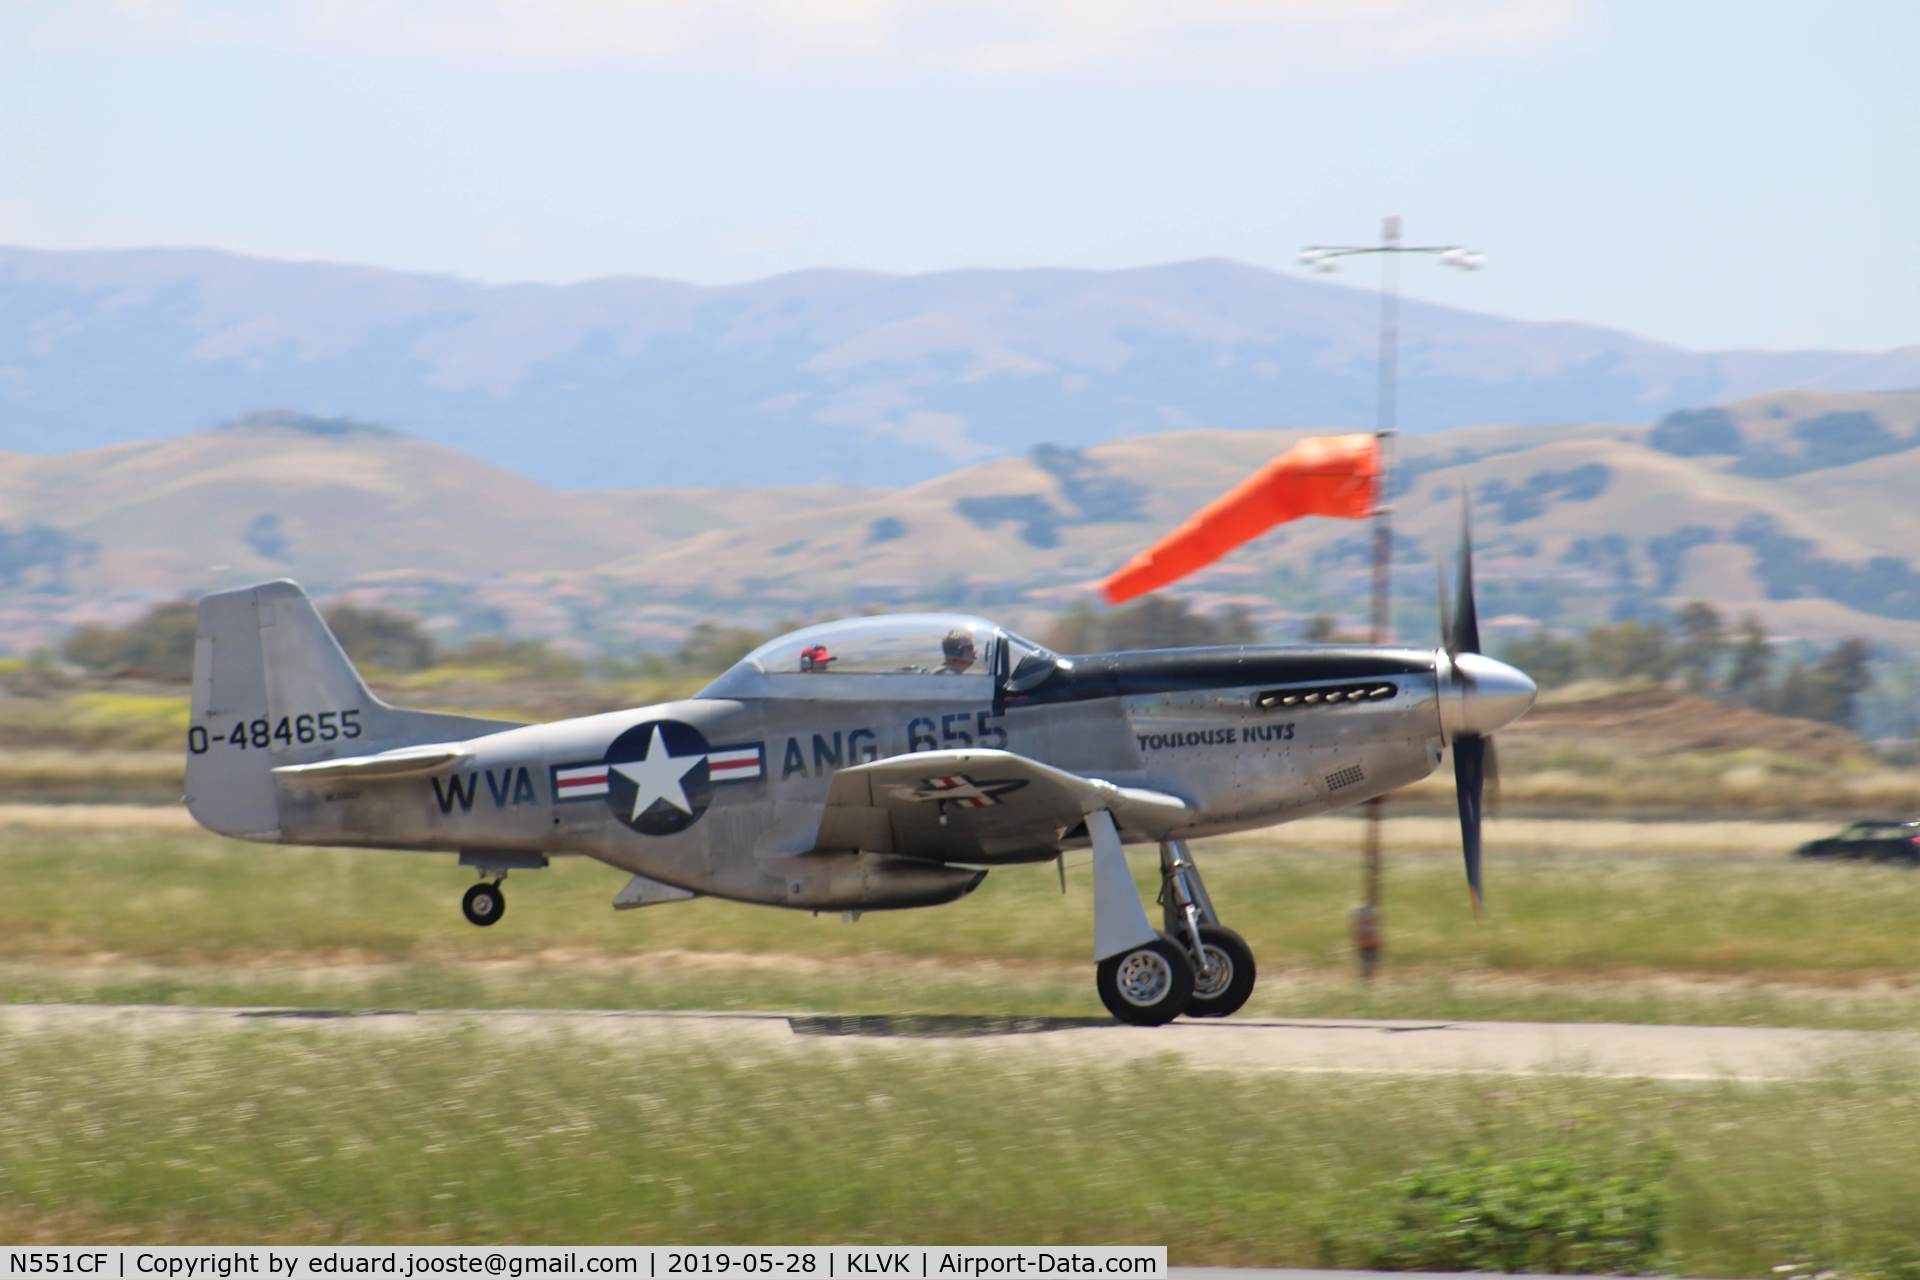 N551CF, 1944 North American TF-51D Mustang C/N 122-44511, Beautiful take-off run of this P-51 during the Wings of Freedom tour at KLVK.